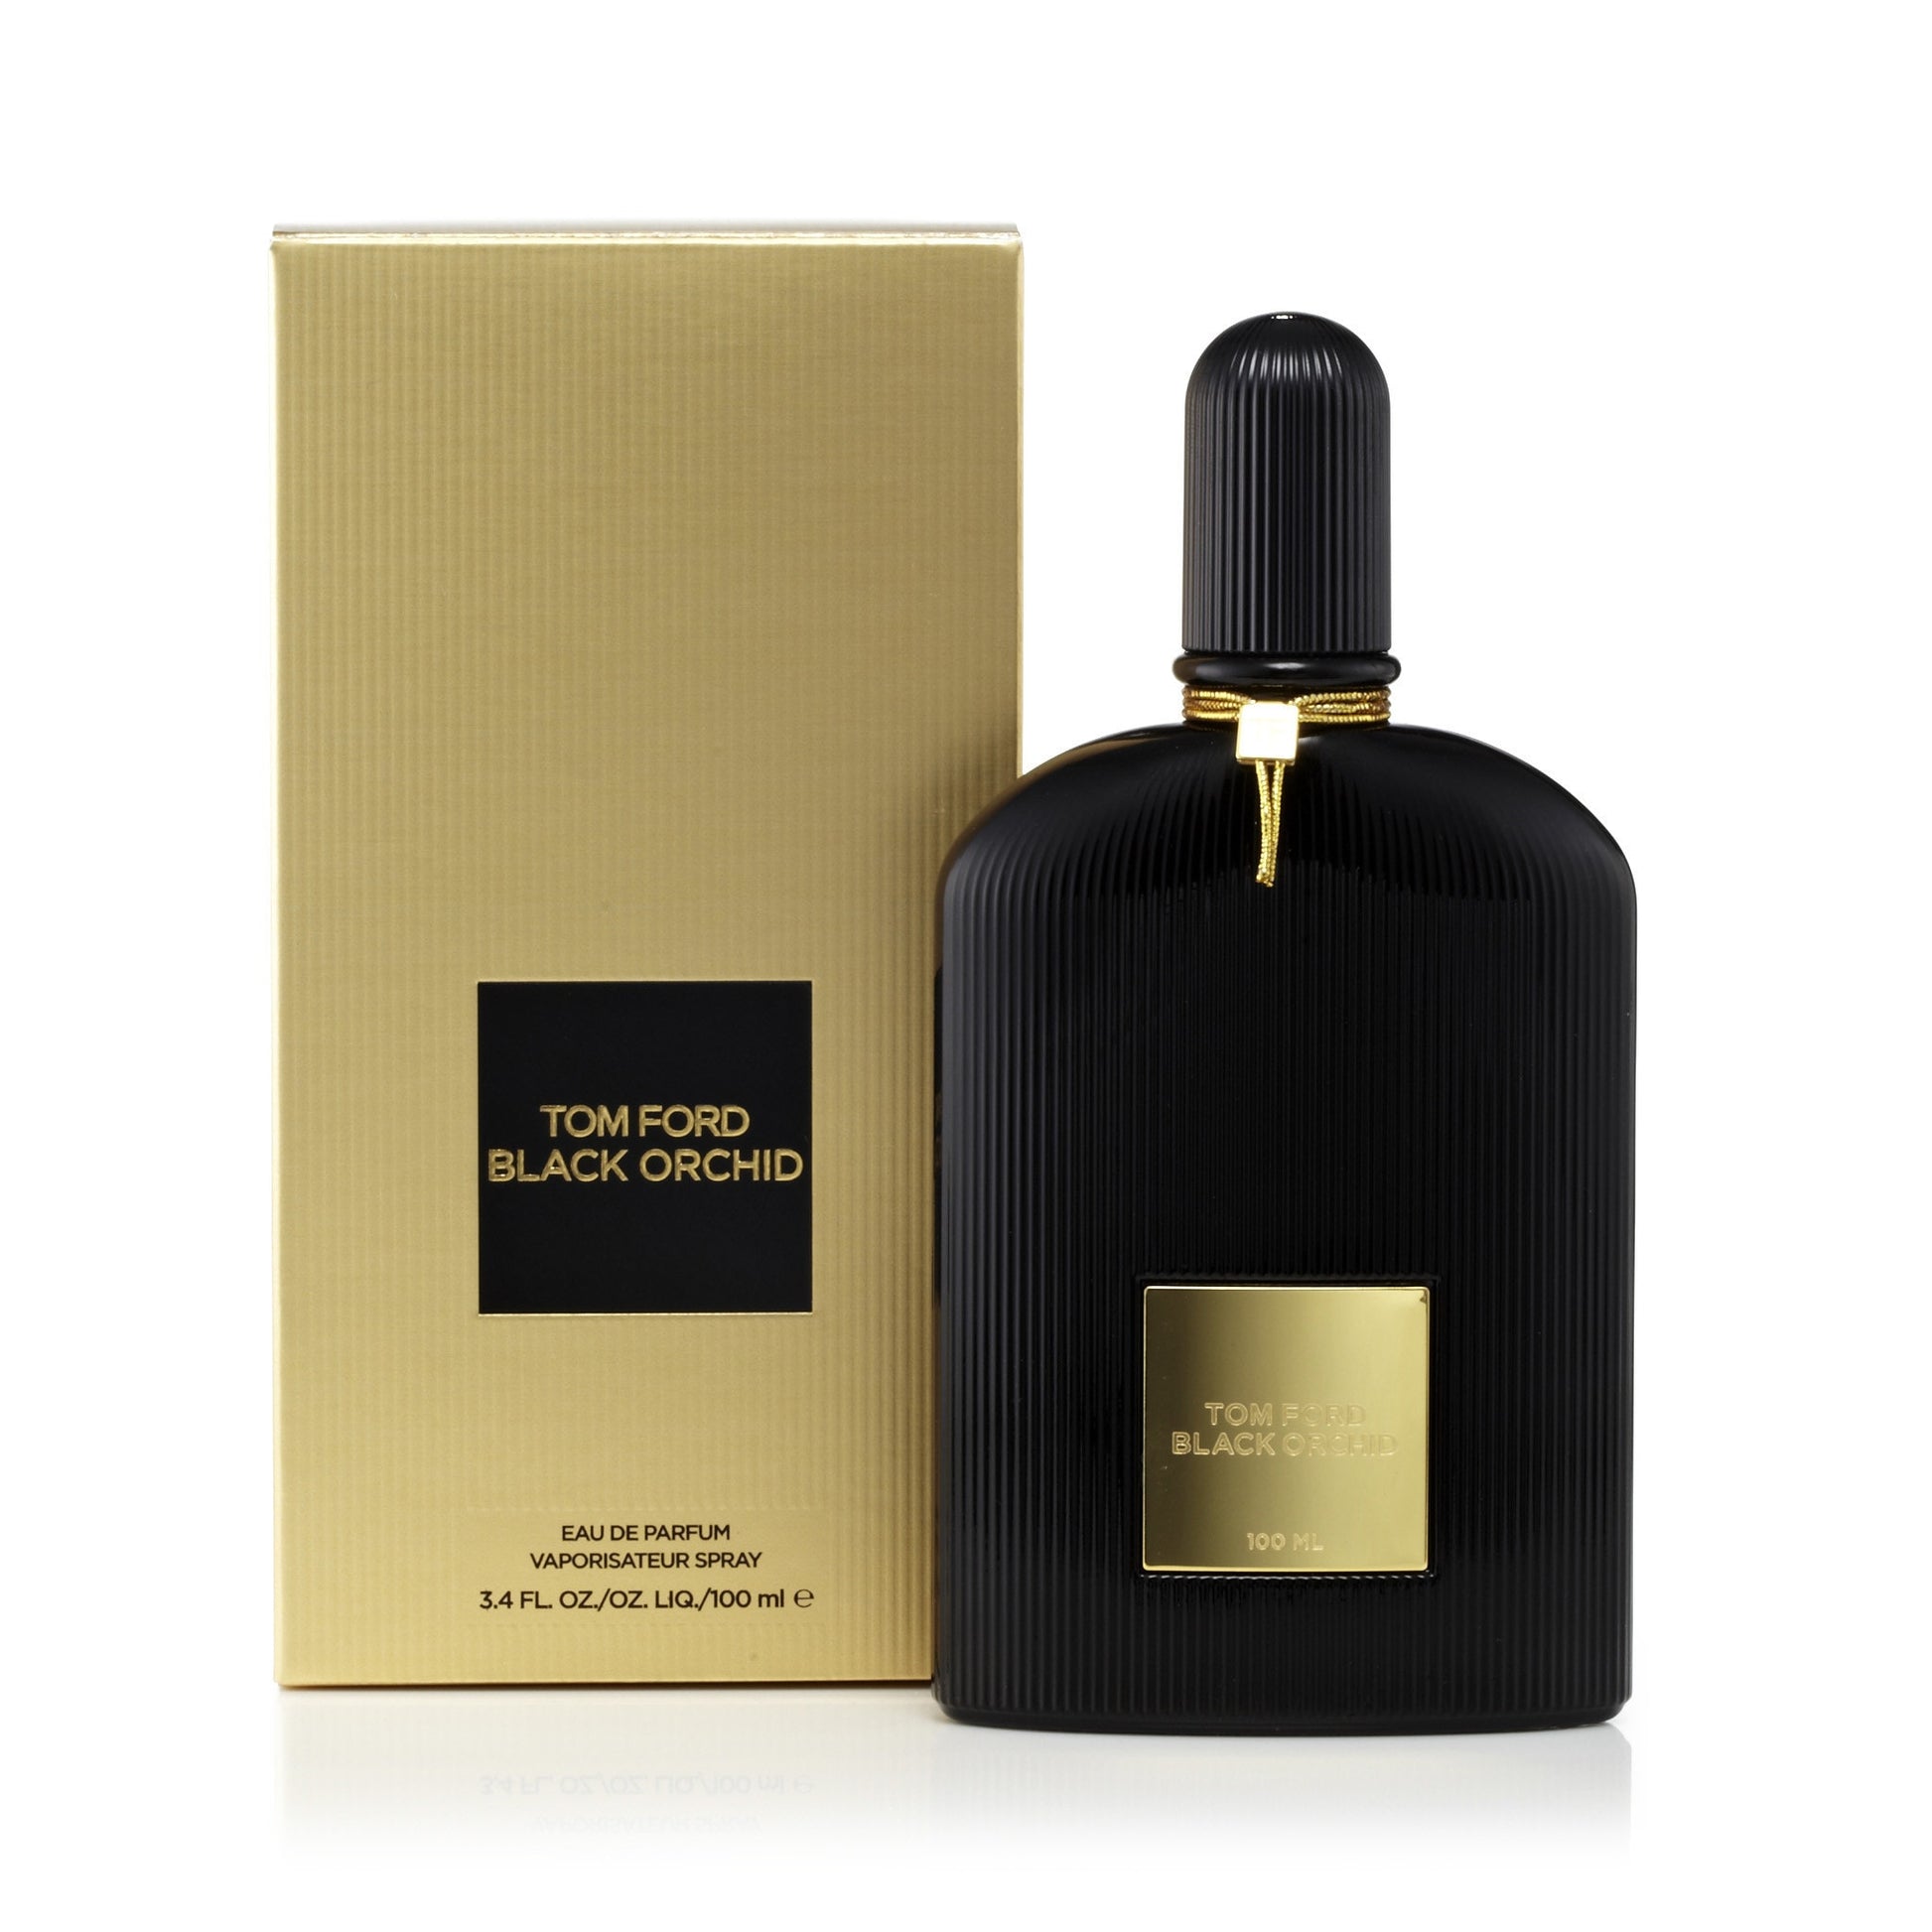 Black Orchid Eau de Parfum Spray for Women by Tom Ford, Product image 1